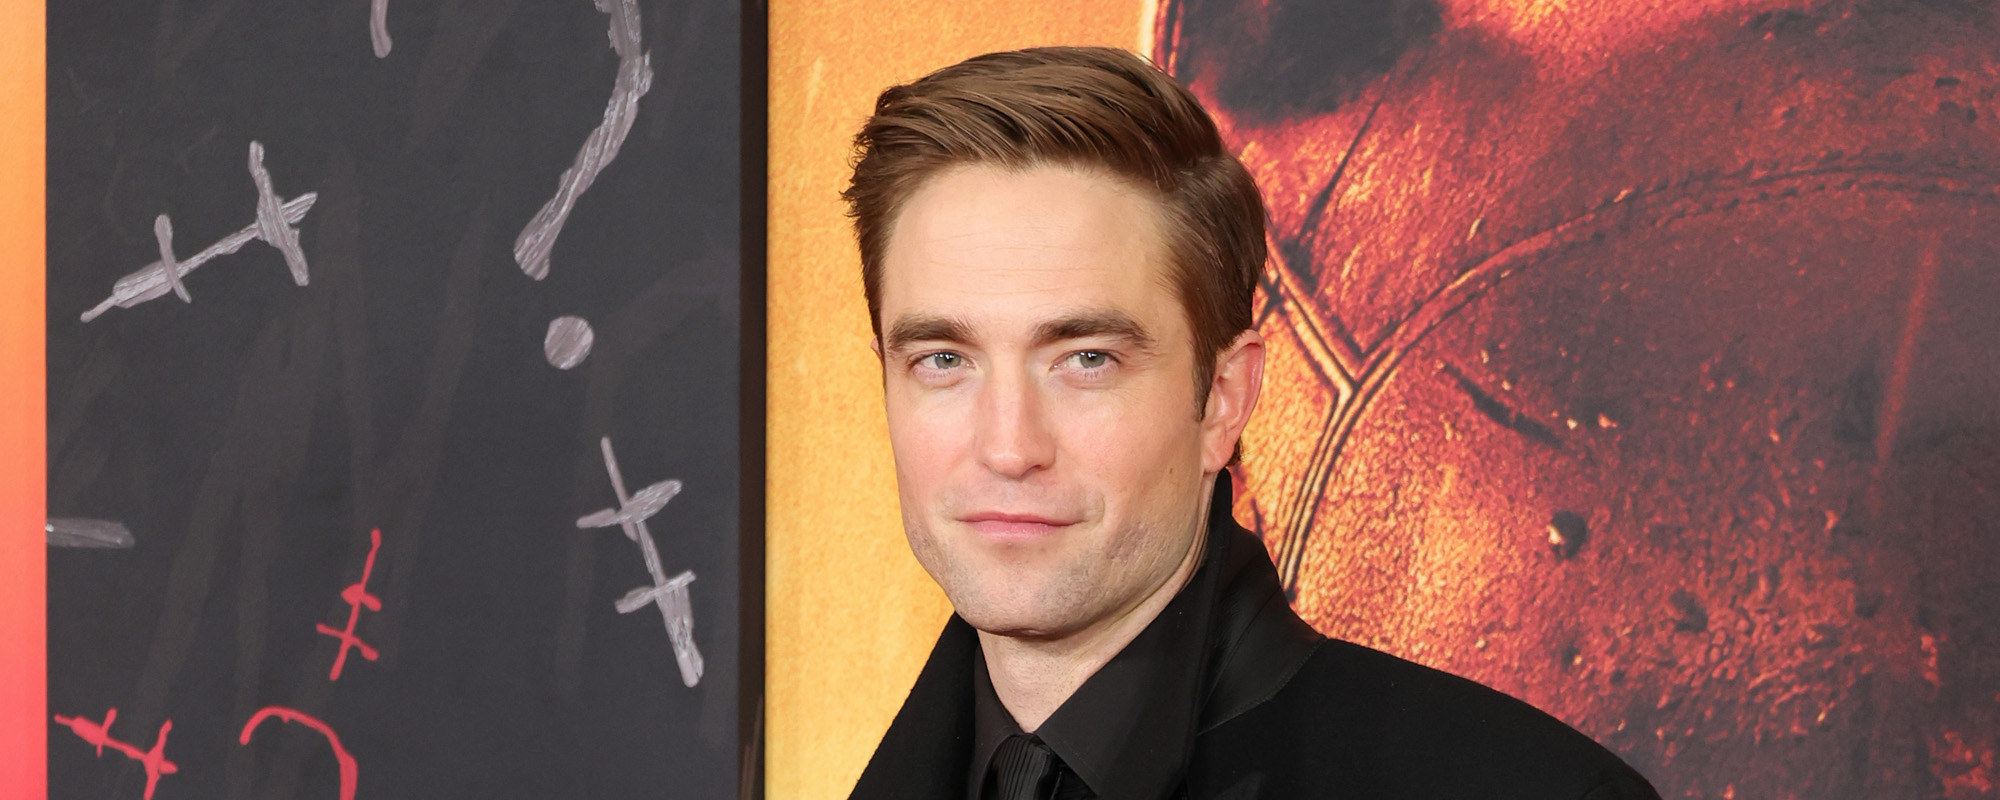 5 Songs You Didn’t Know Robert Pattinson Wrote